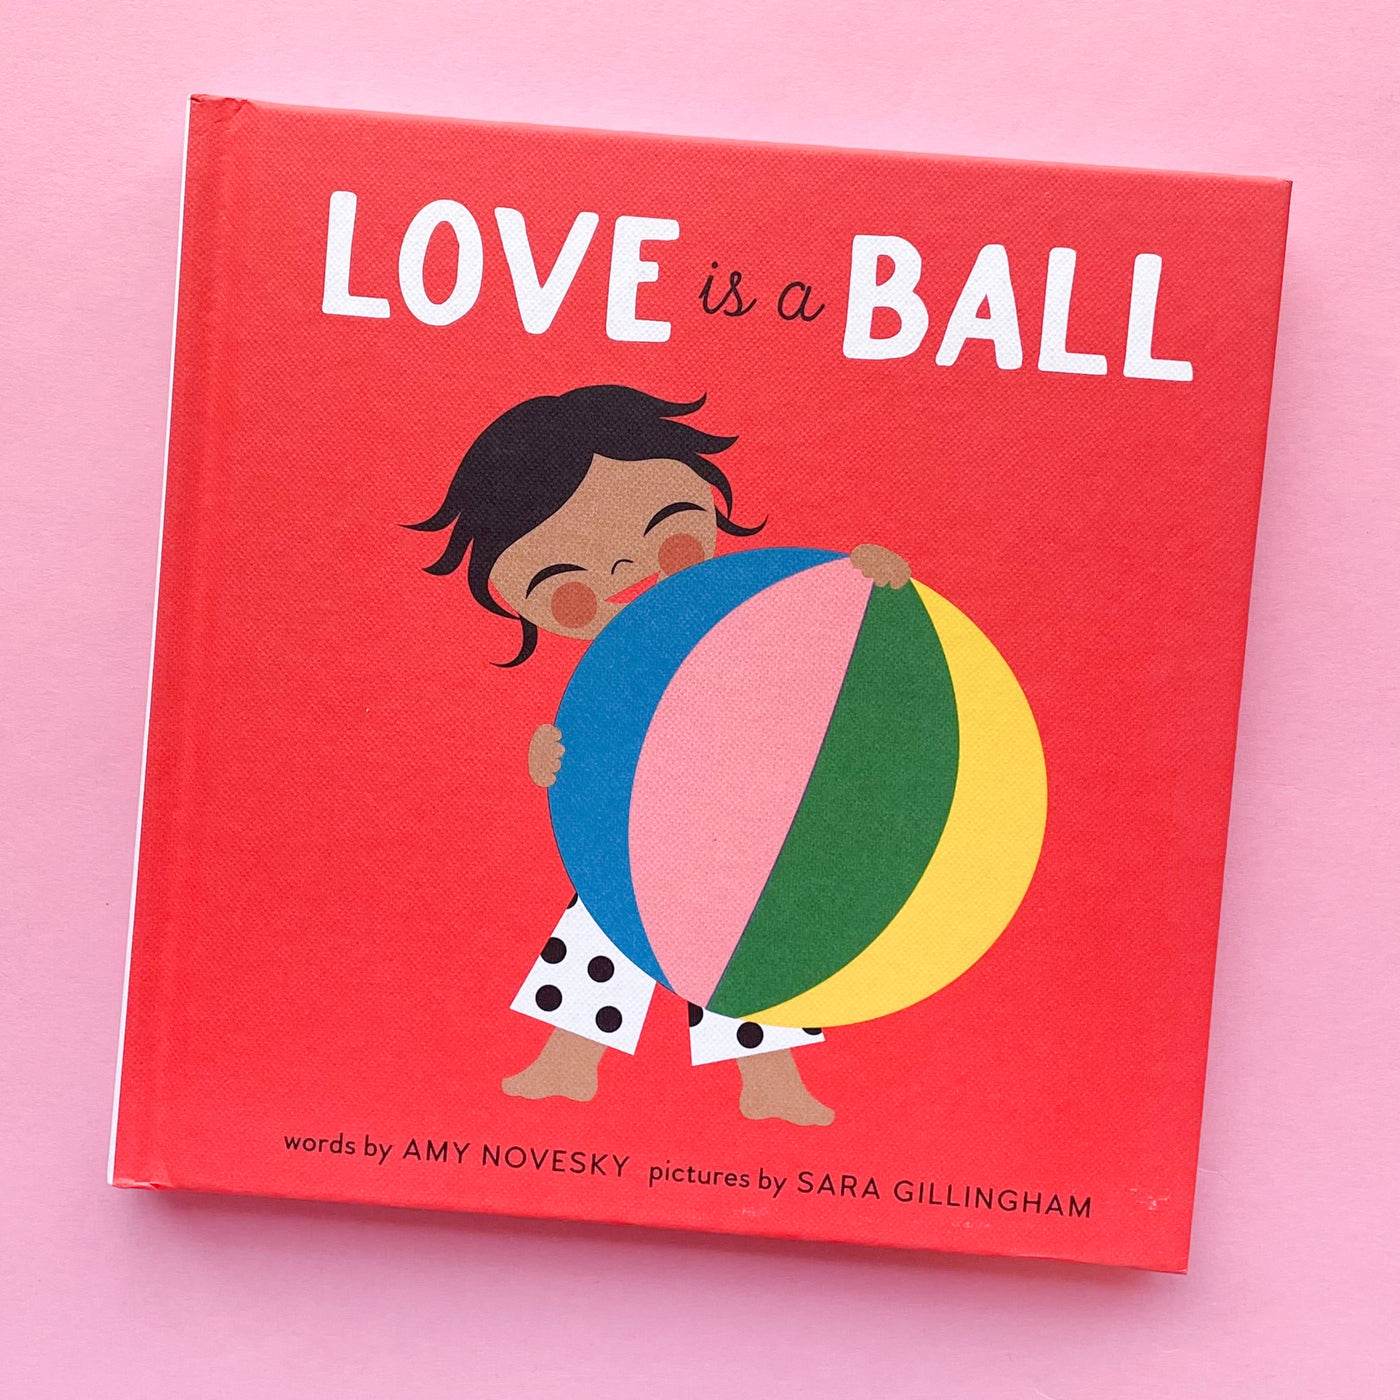 Love Is a Ball by Amy Novesky and Sara Gillingham